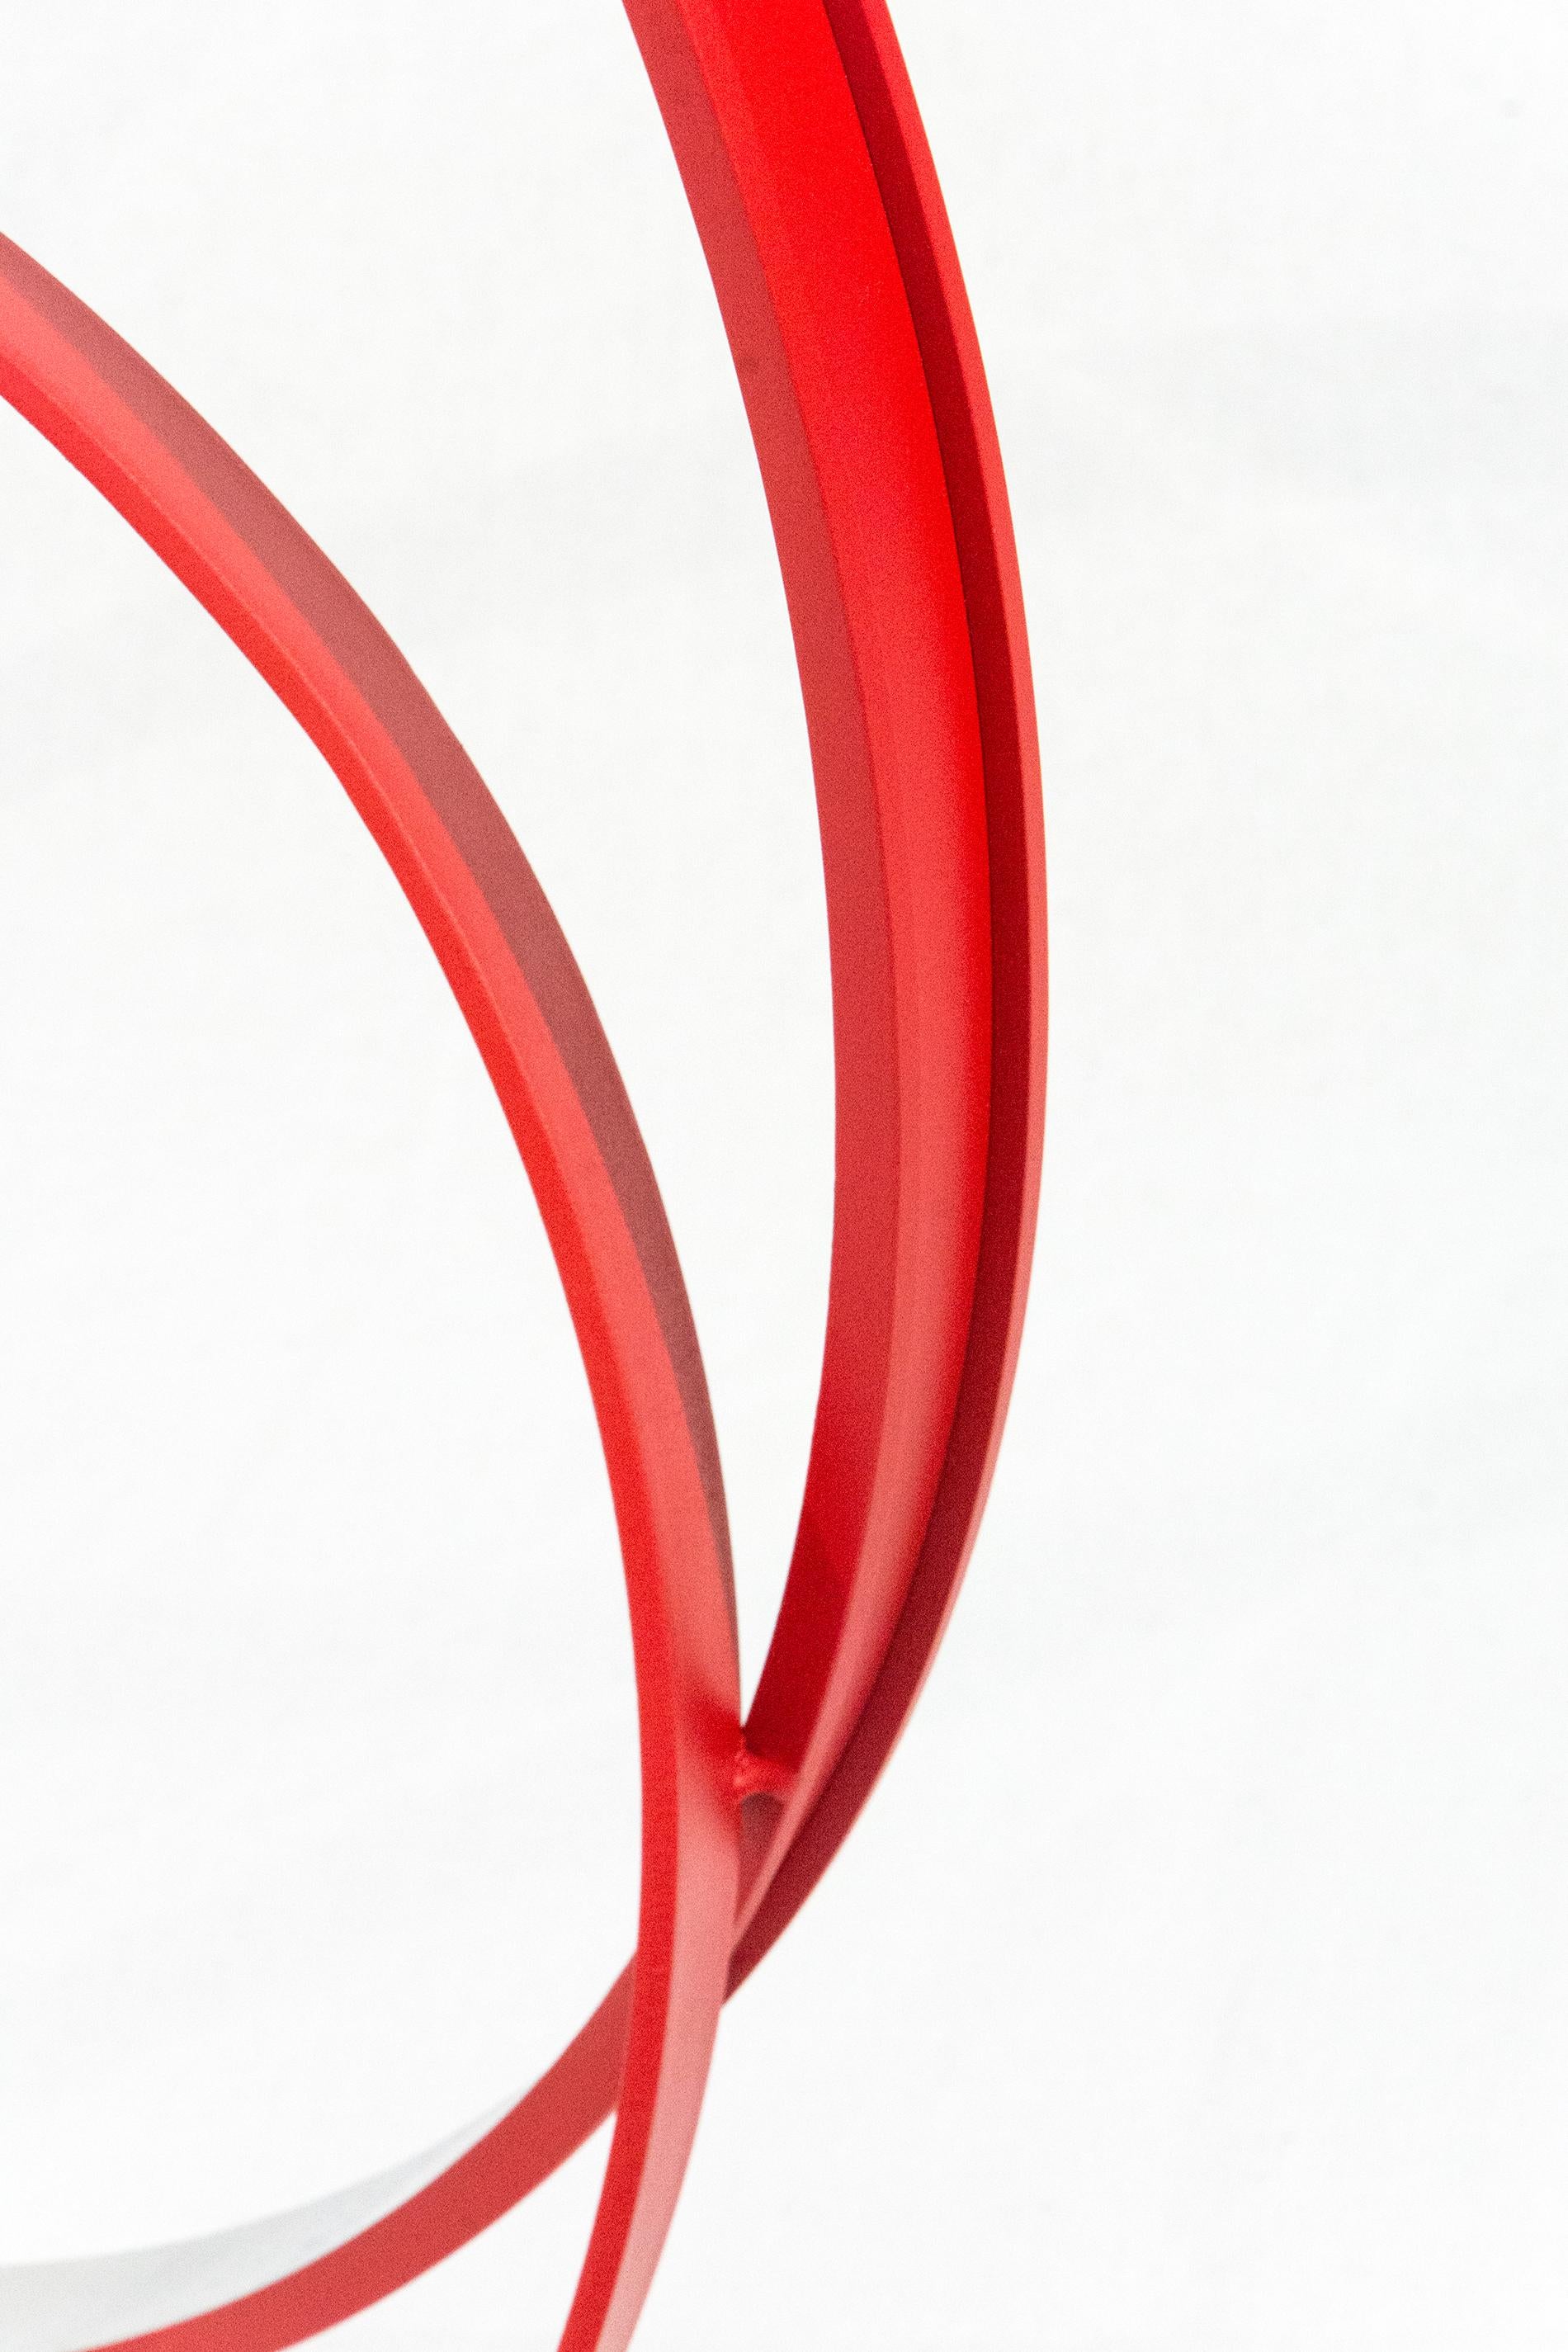 The elegant minimal form of this sculpture is accentuated by its bright poppy red exterior. This is Philippe Pallafray. Hand forged from aluminum, the four rings of various sizes sit inside and opposite one large ring. The interior of each ring is